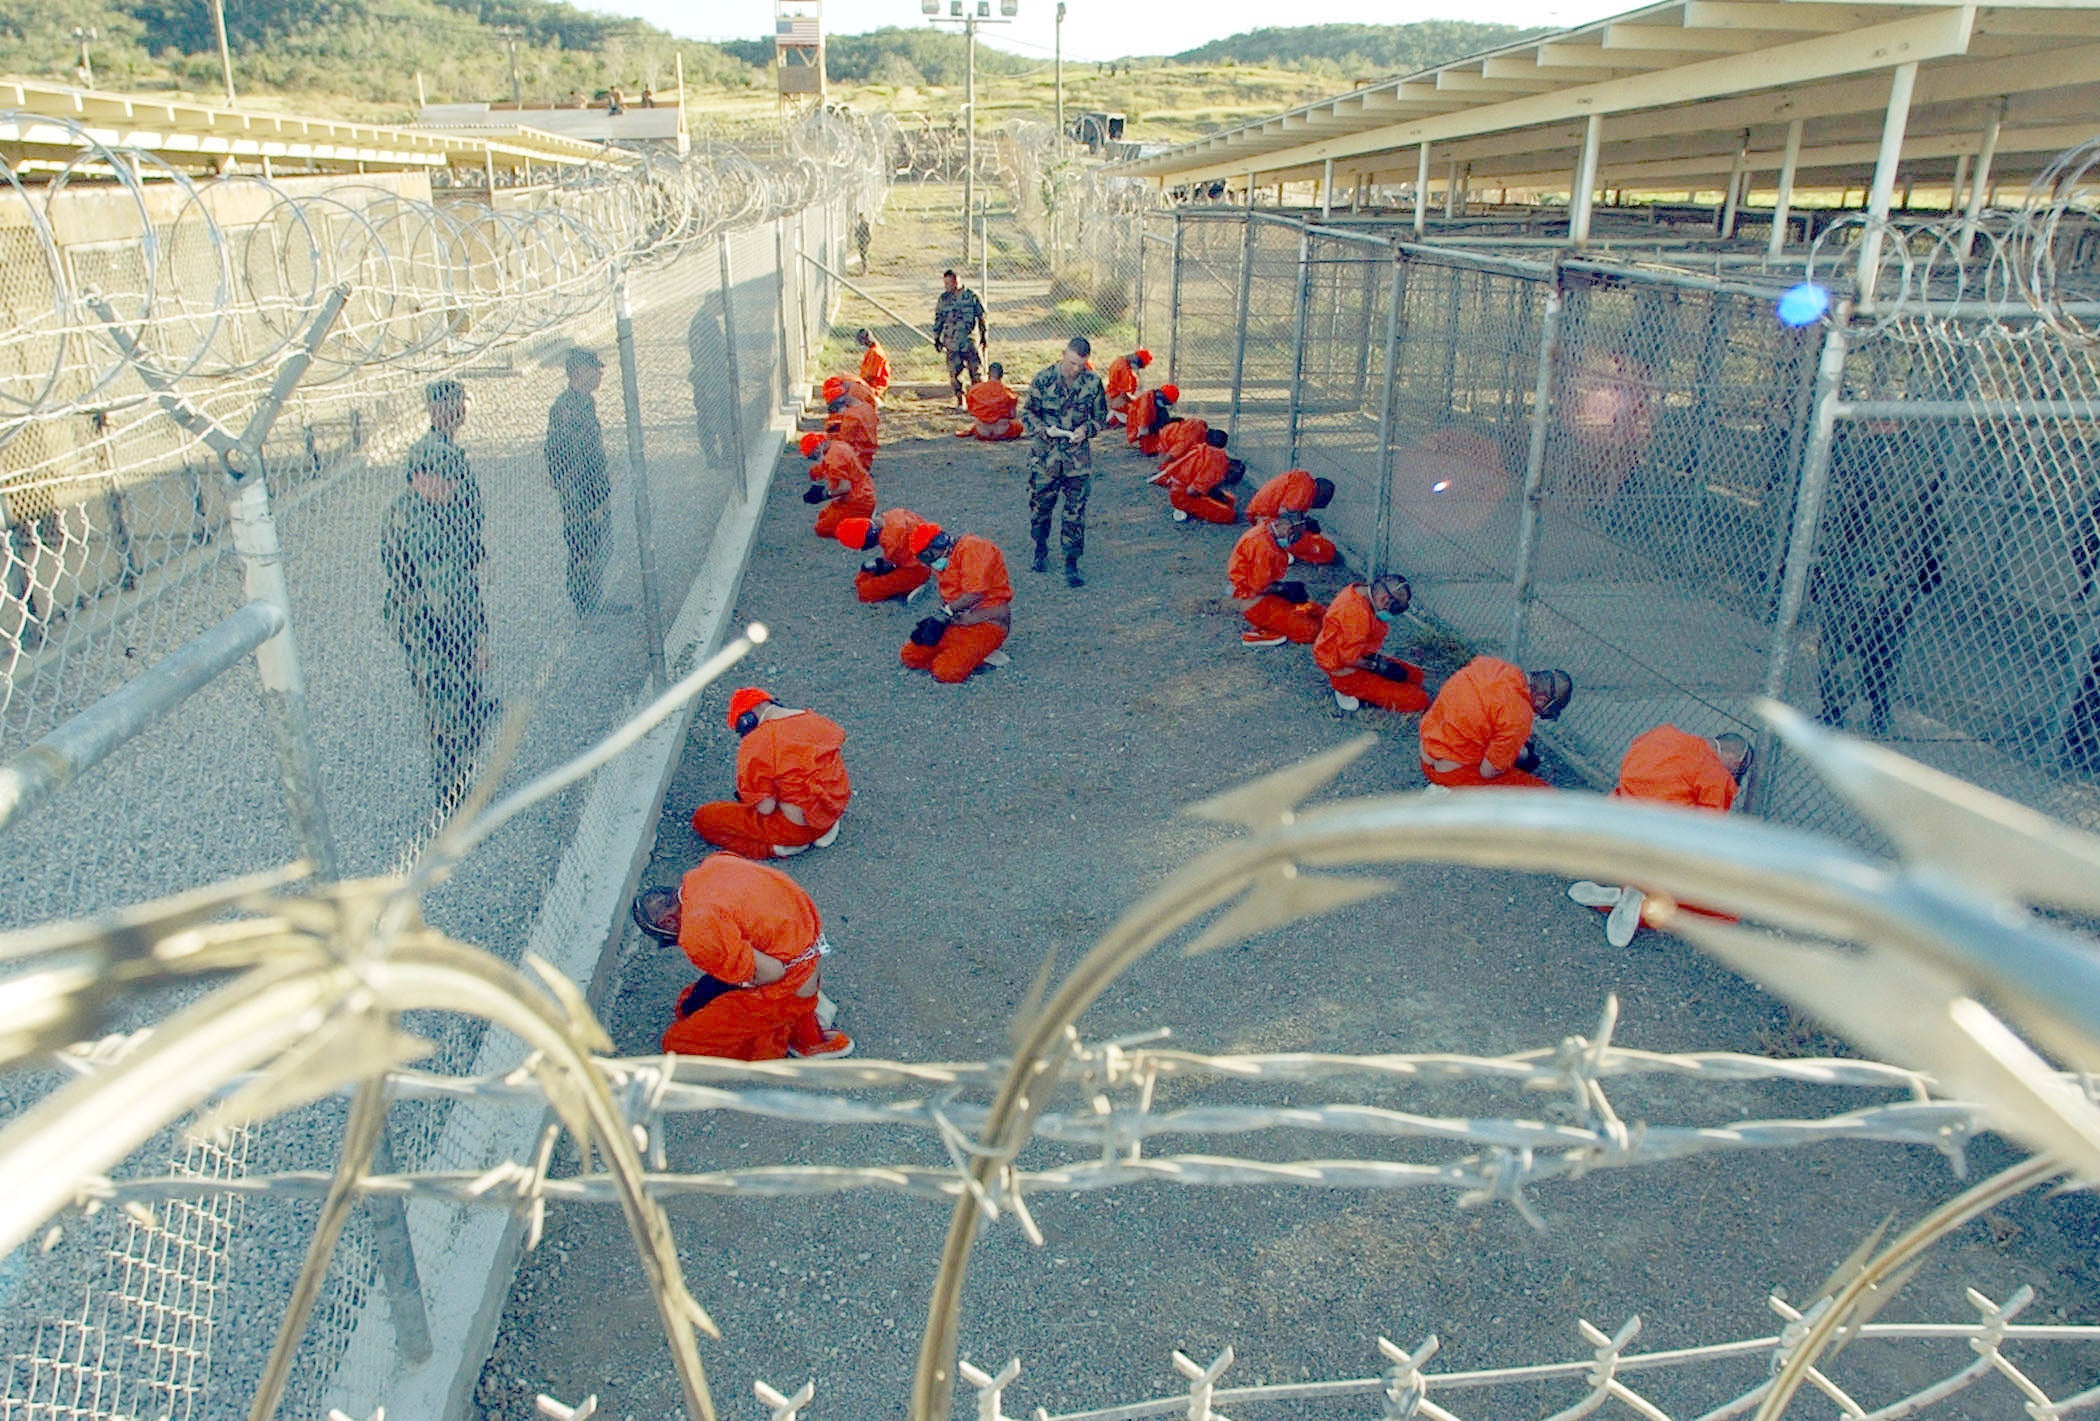 The first foreign Muslim men imprisoned by the US military at the detention center at Guantánamo Bay, Cuba, in the so-called “global war on terror.” Since January 2002, the US has held nearly 800 men and boys at Guantánamo. Of the 39 who currently remain, 27 have never been charged. © 2002 Shane McCoy/Greg Mathieson/Mai/Getty Images